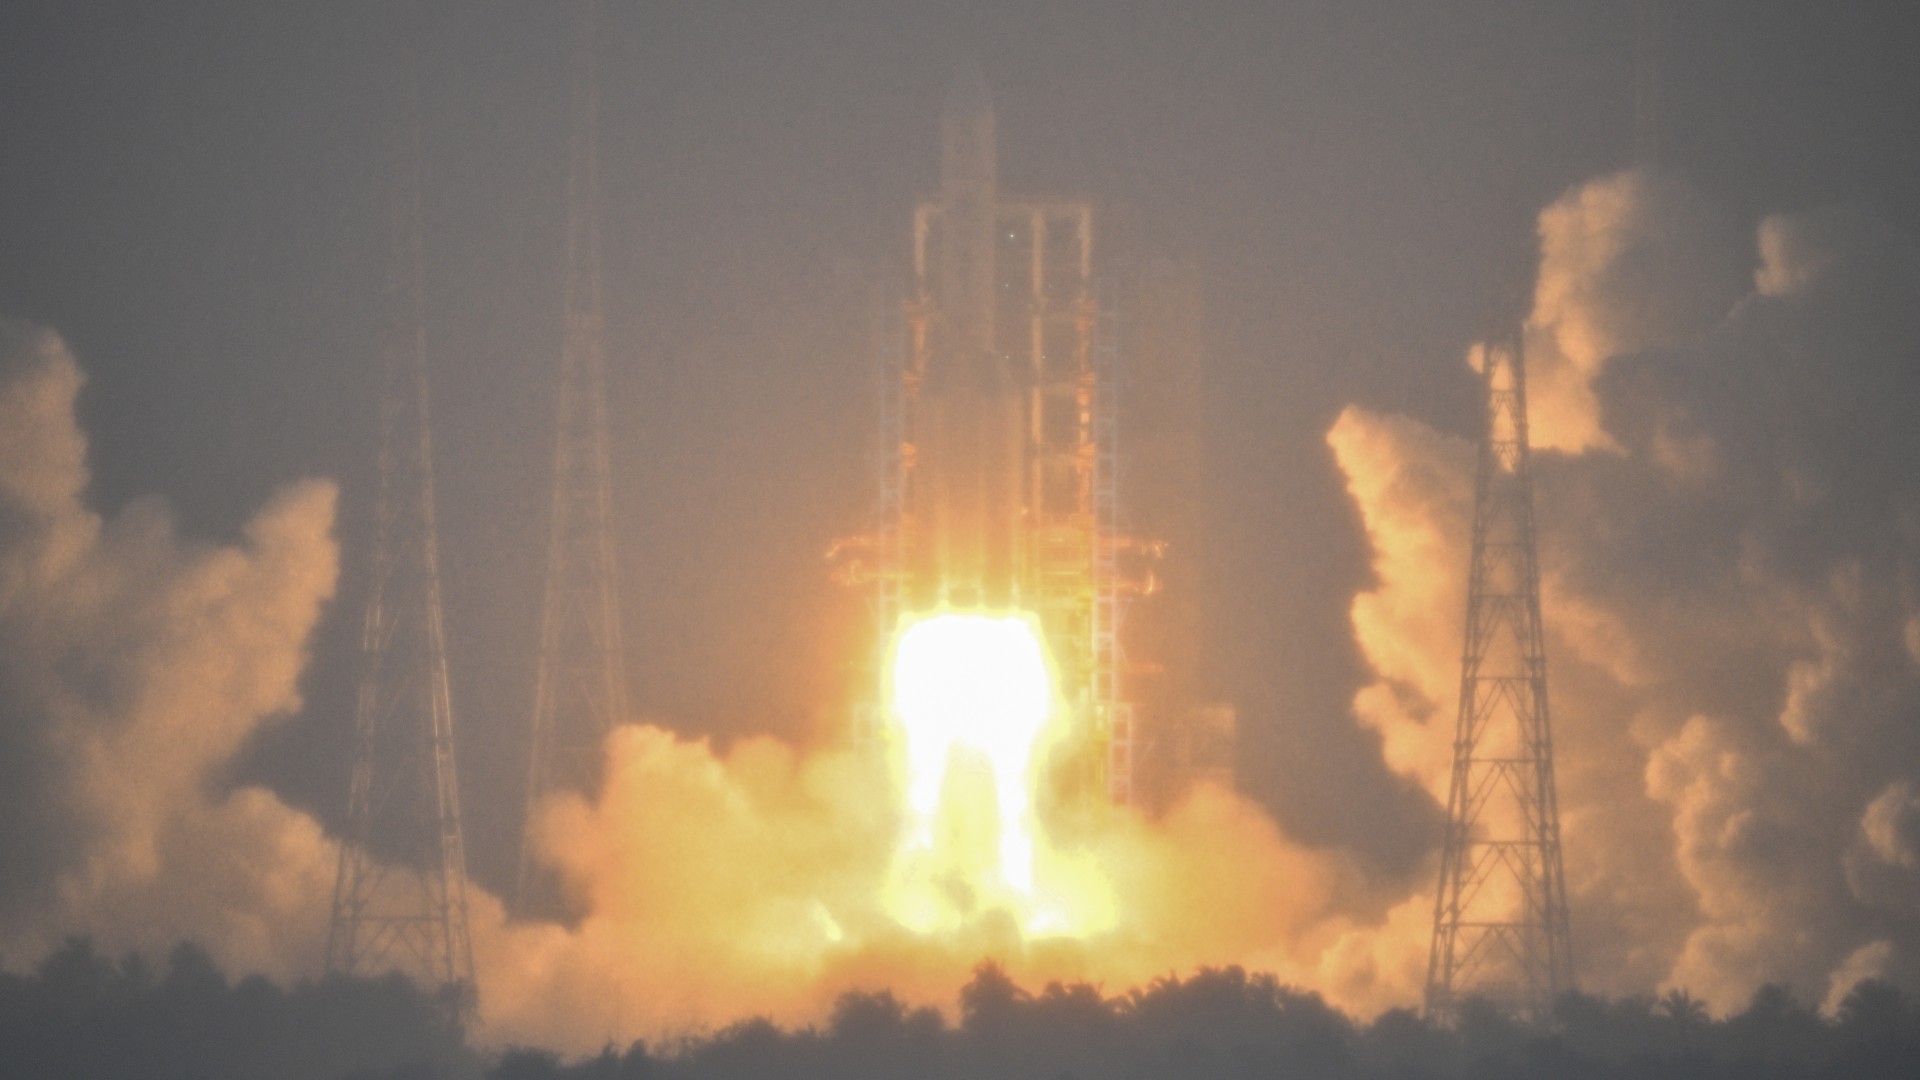 China launches Chang'e 6 sample-return mission to moon's far side (video)